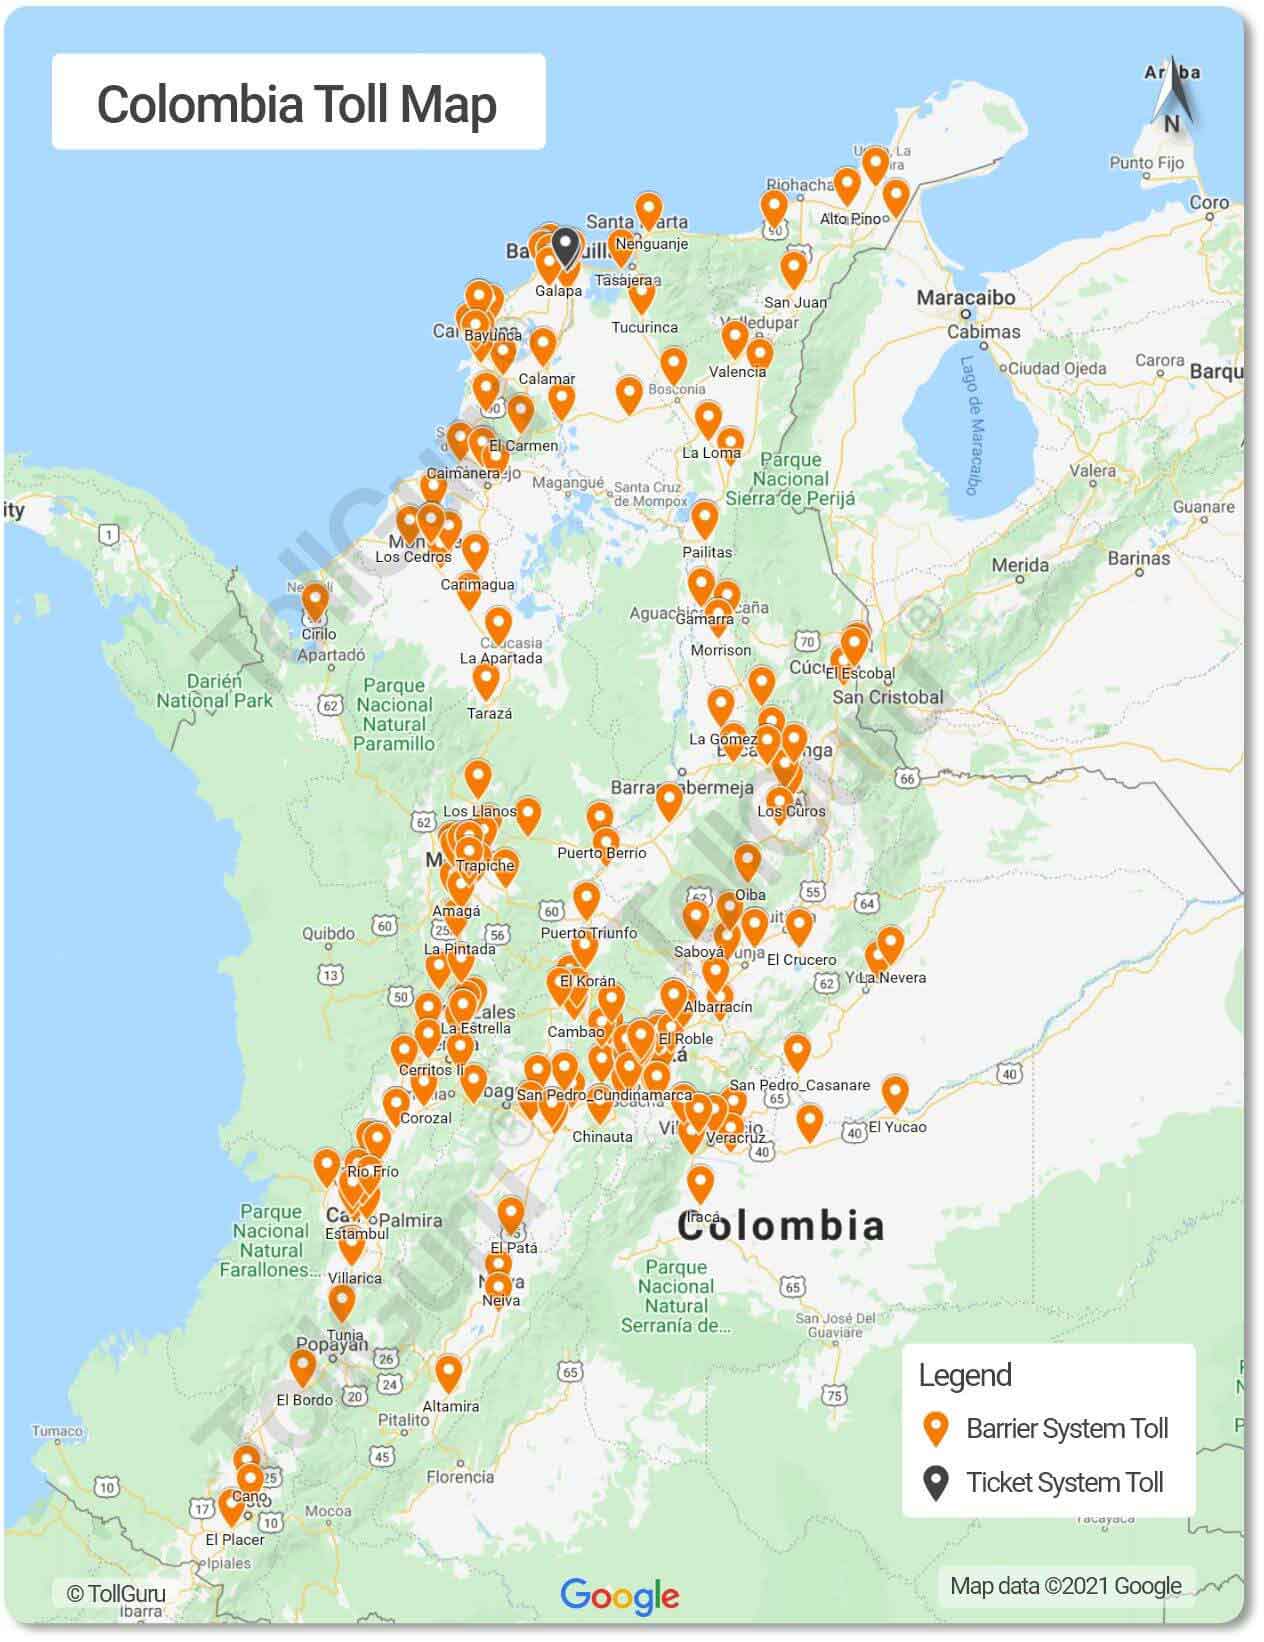 Toll plazas of Colombia on national and departmental roads including Oriente Tunnel, Pipiral toll, Circasia toll and those connecting Bogotá to other cities.